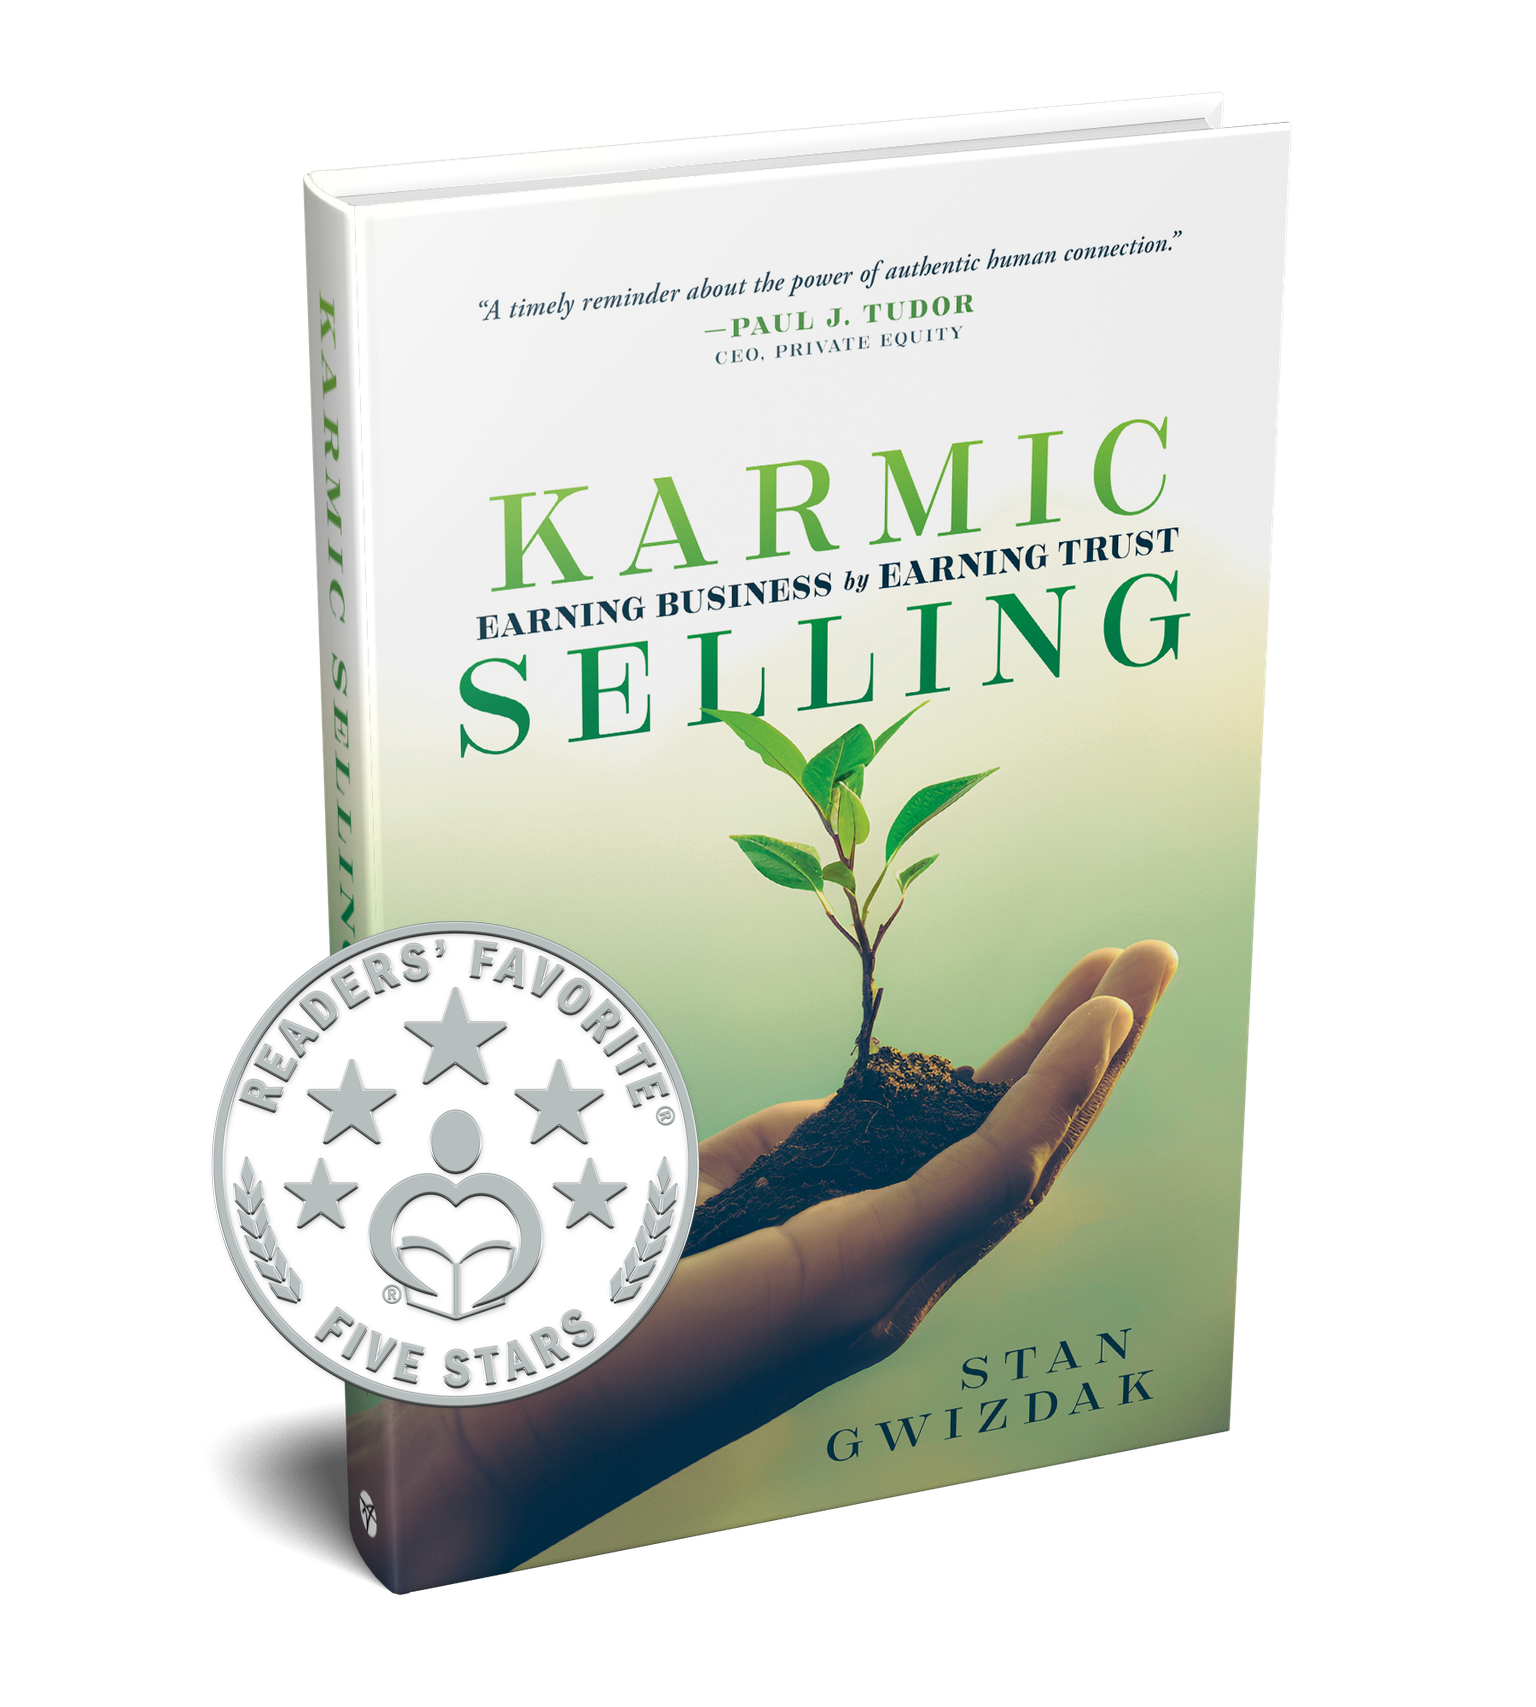 Karmic Selling front cover with a reader's favorite five stars badge on top: book cover contains an image of a hand holding dirt and a growing sprout